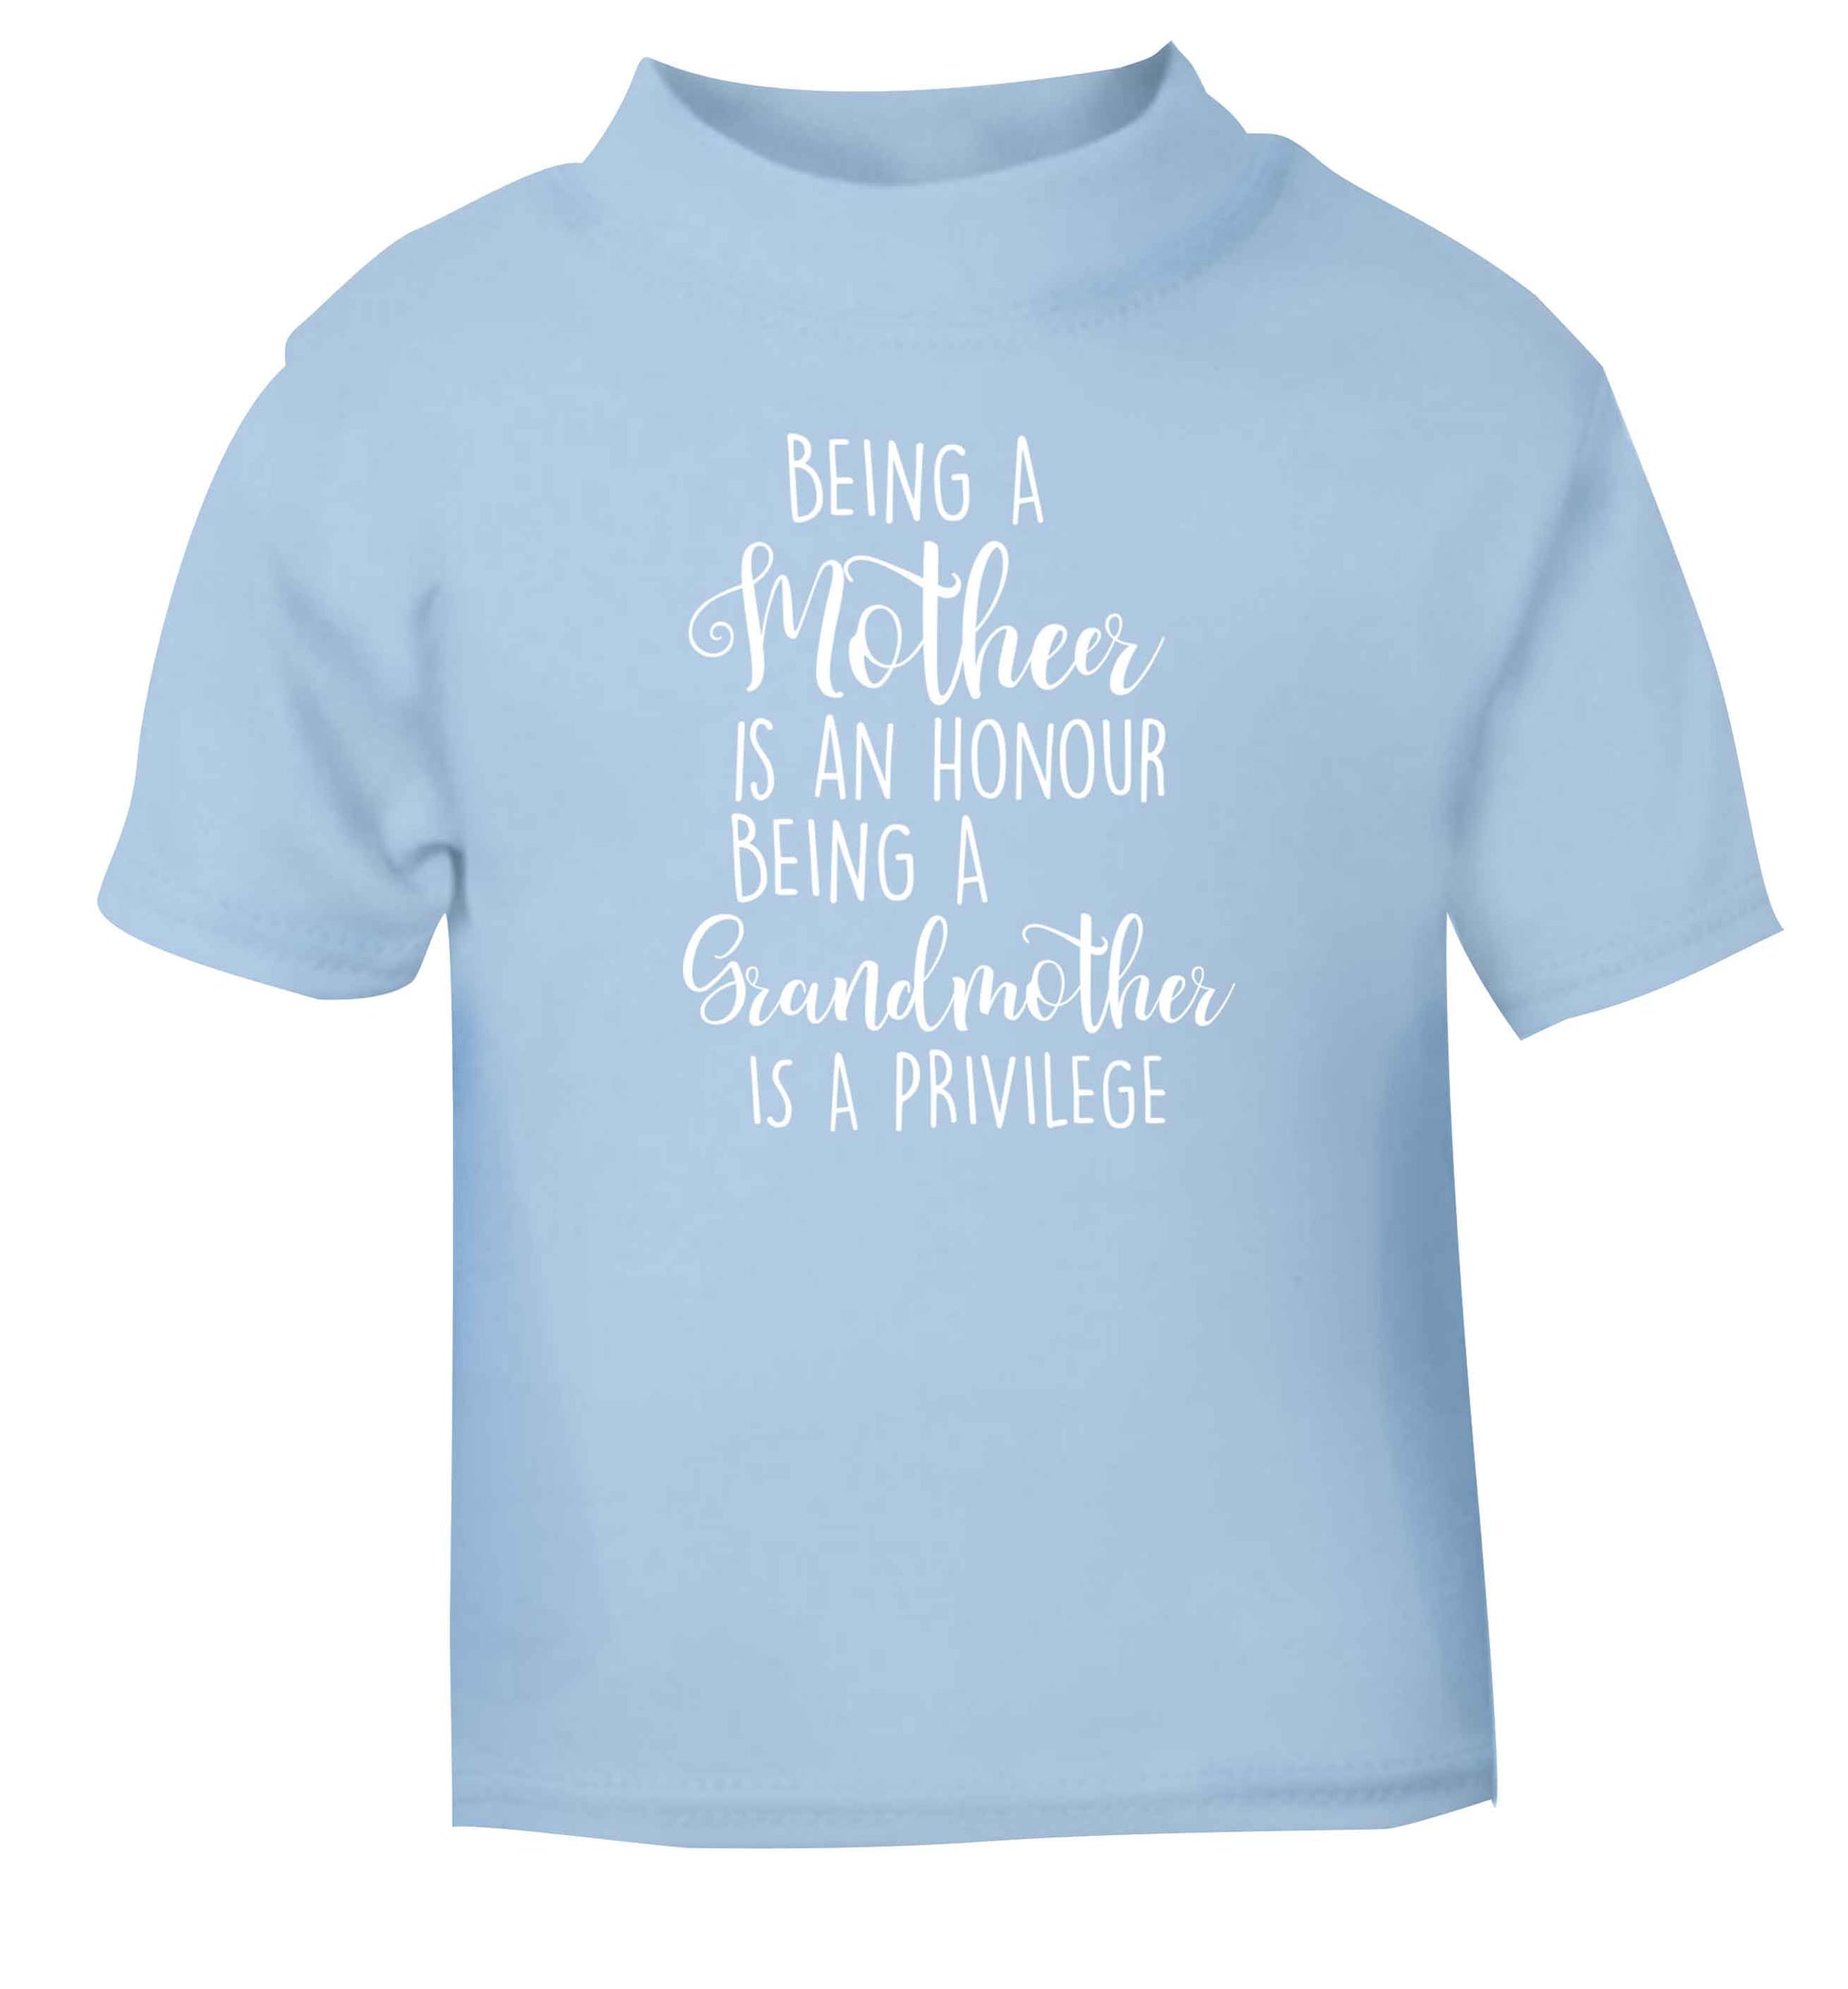 Being a mother is an honour being an grandmother is a privilege light blue Baby Toddler Tshirt 2 Years